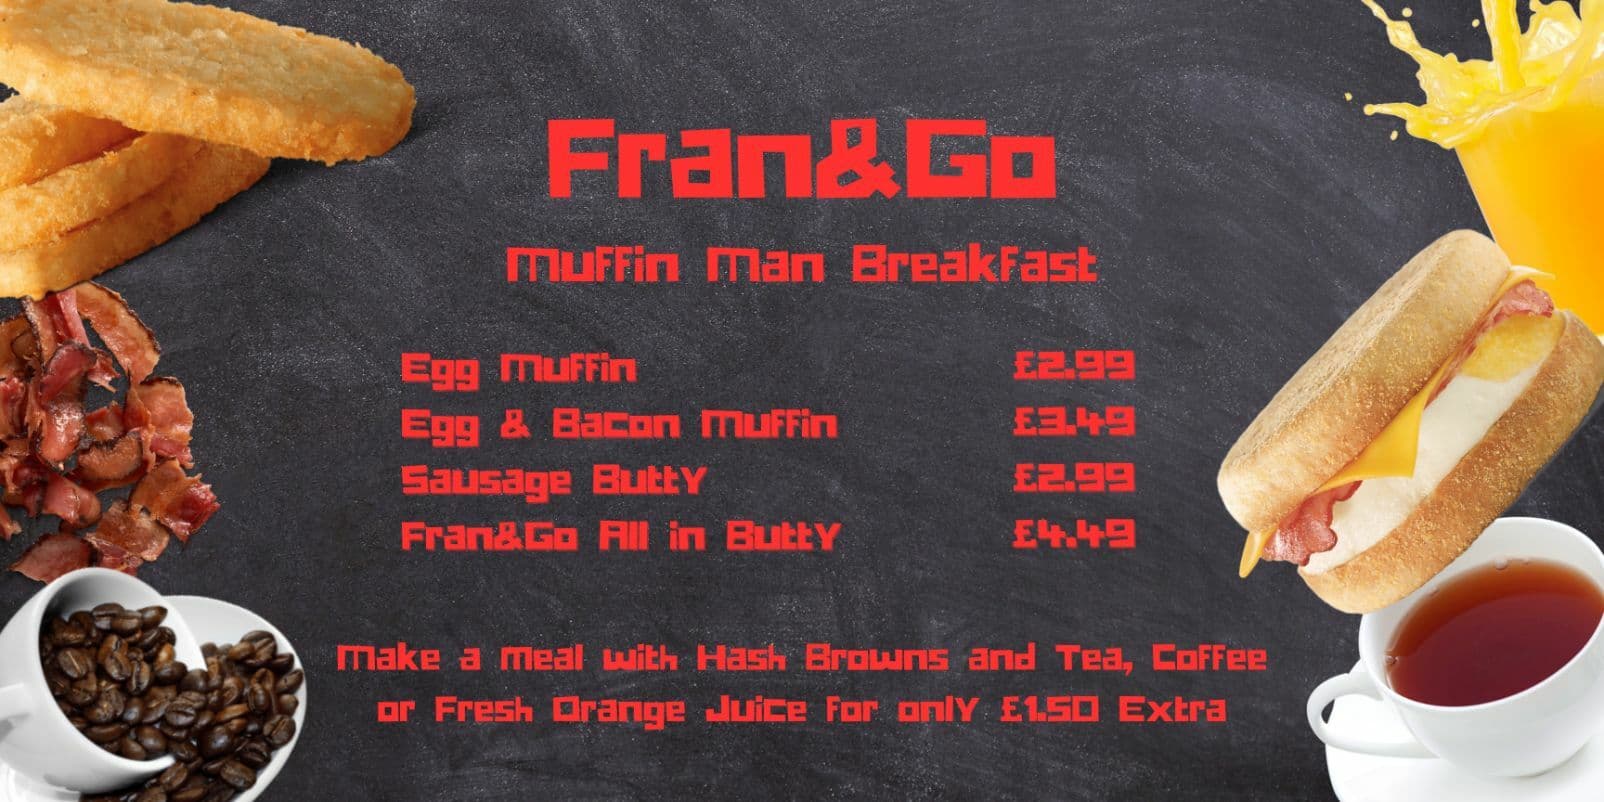 15% off food at Fran & Go (cruise crew exclusive)